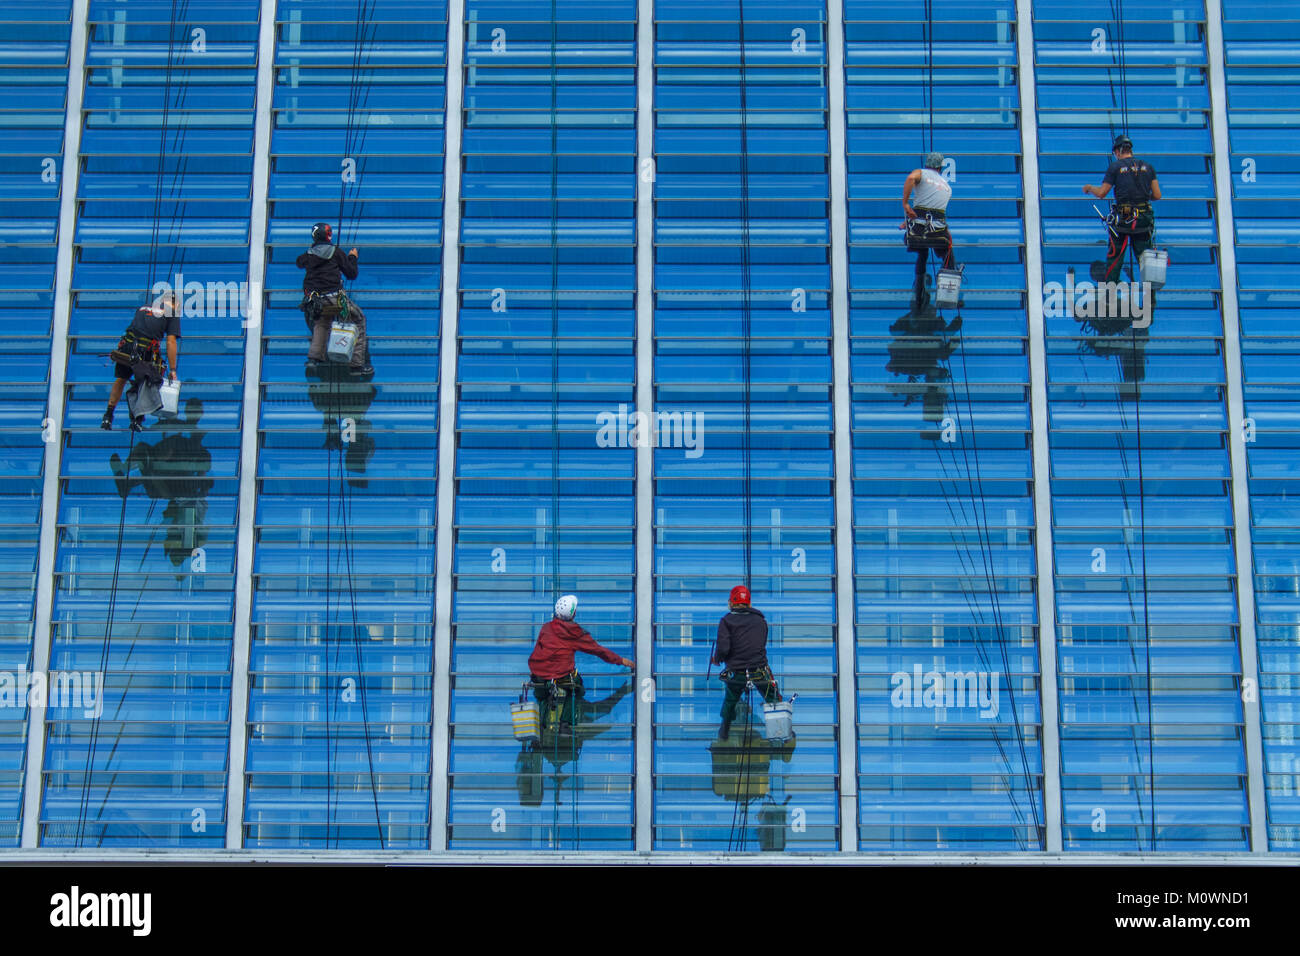 Window washers hanging from ropes, cleaning the side of a building. Stock Photo